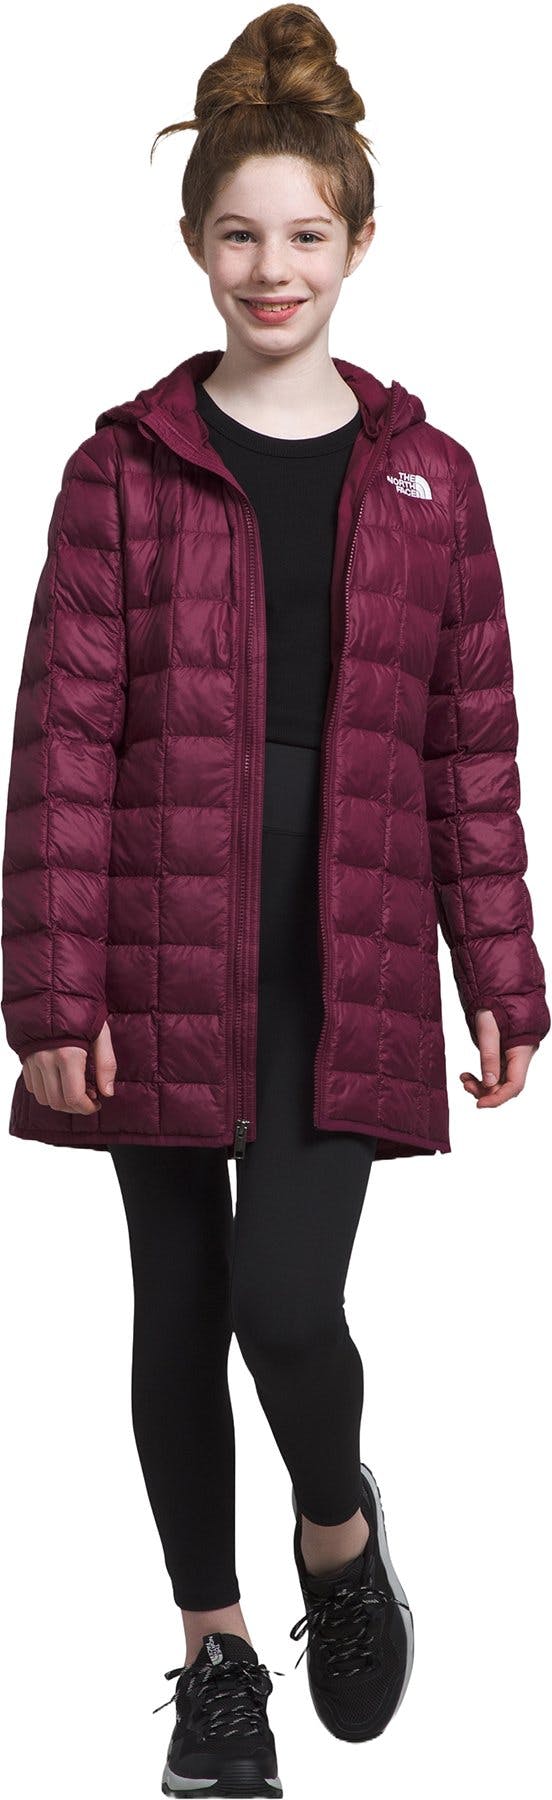 Product image for ThermoBall Parka - Girls